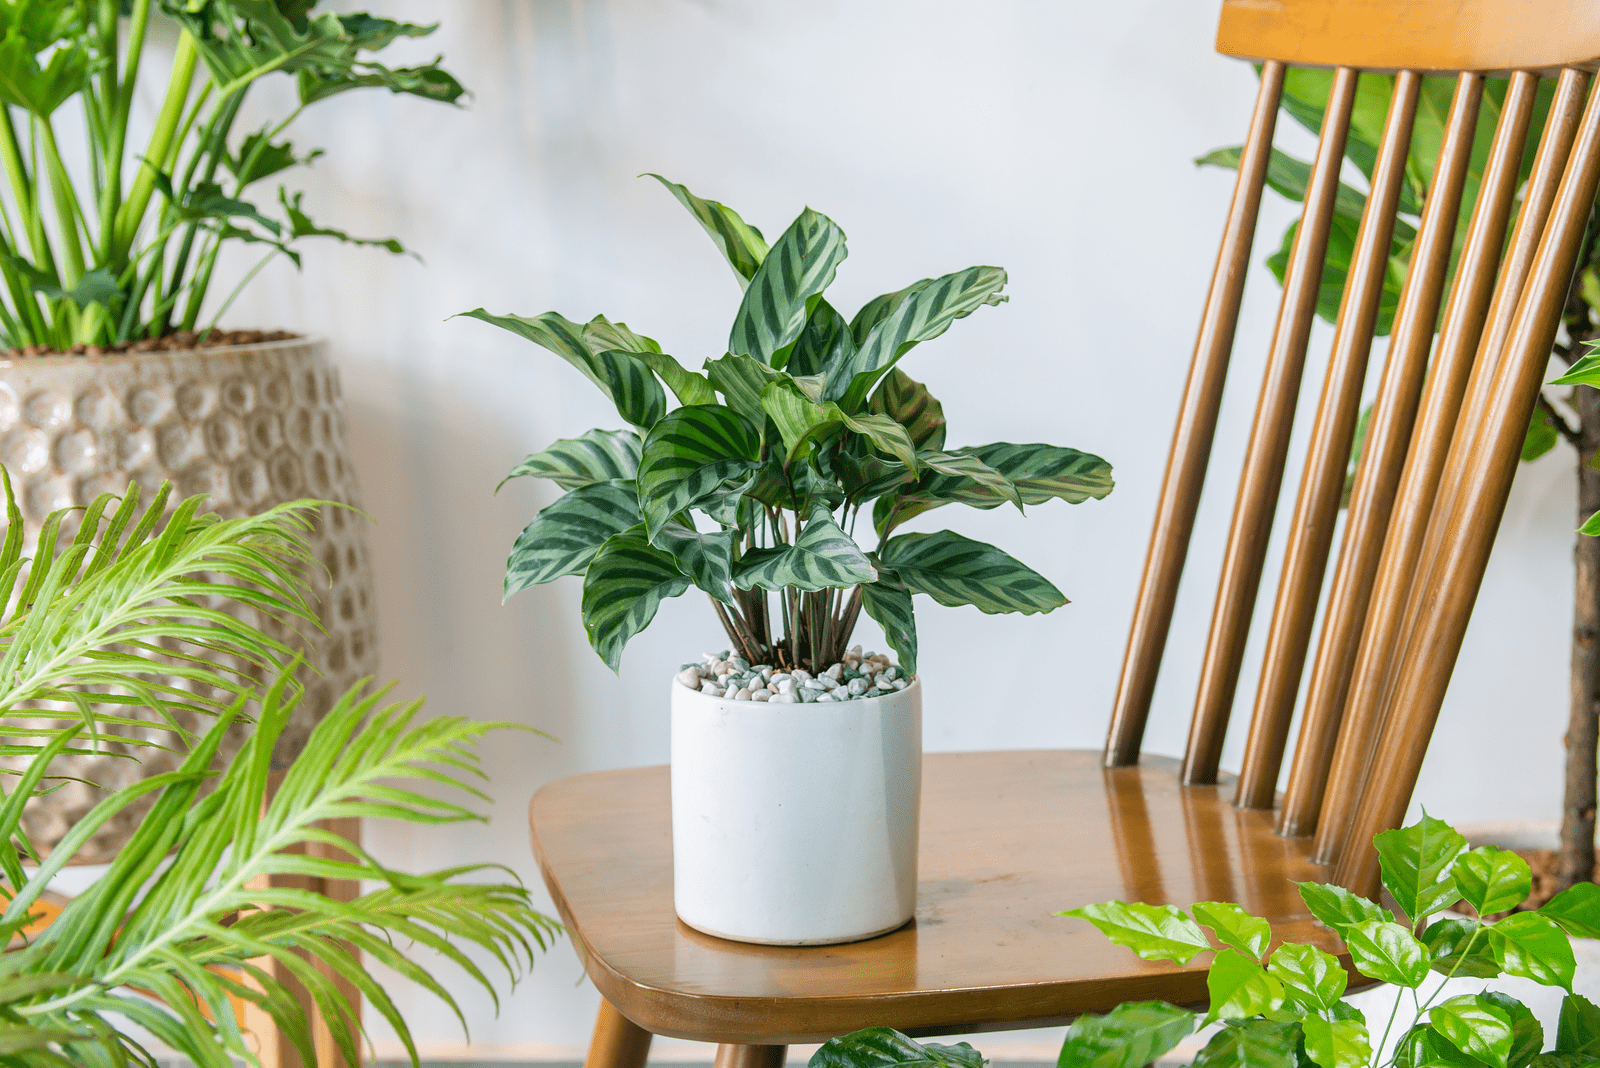 Calathea in a white pot on a wooden chair